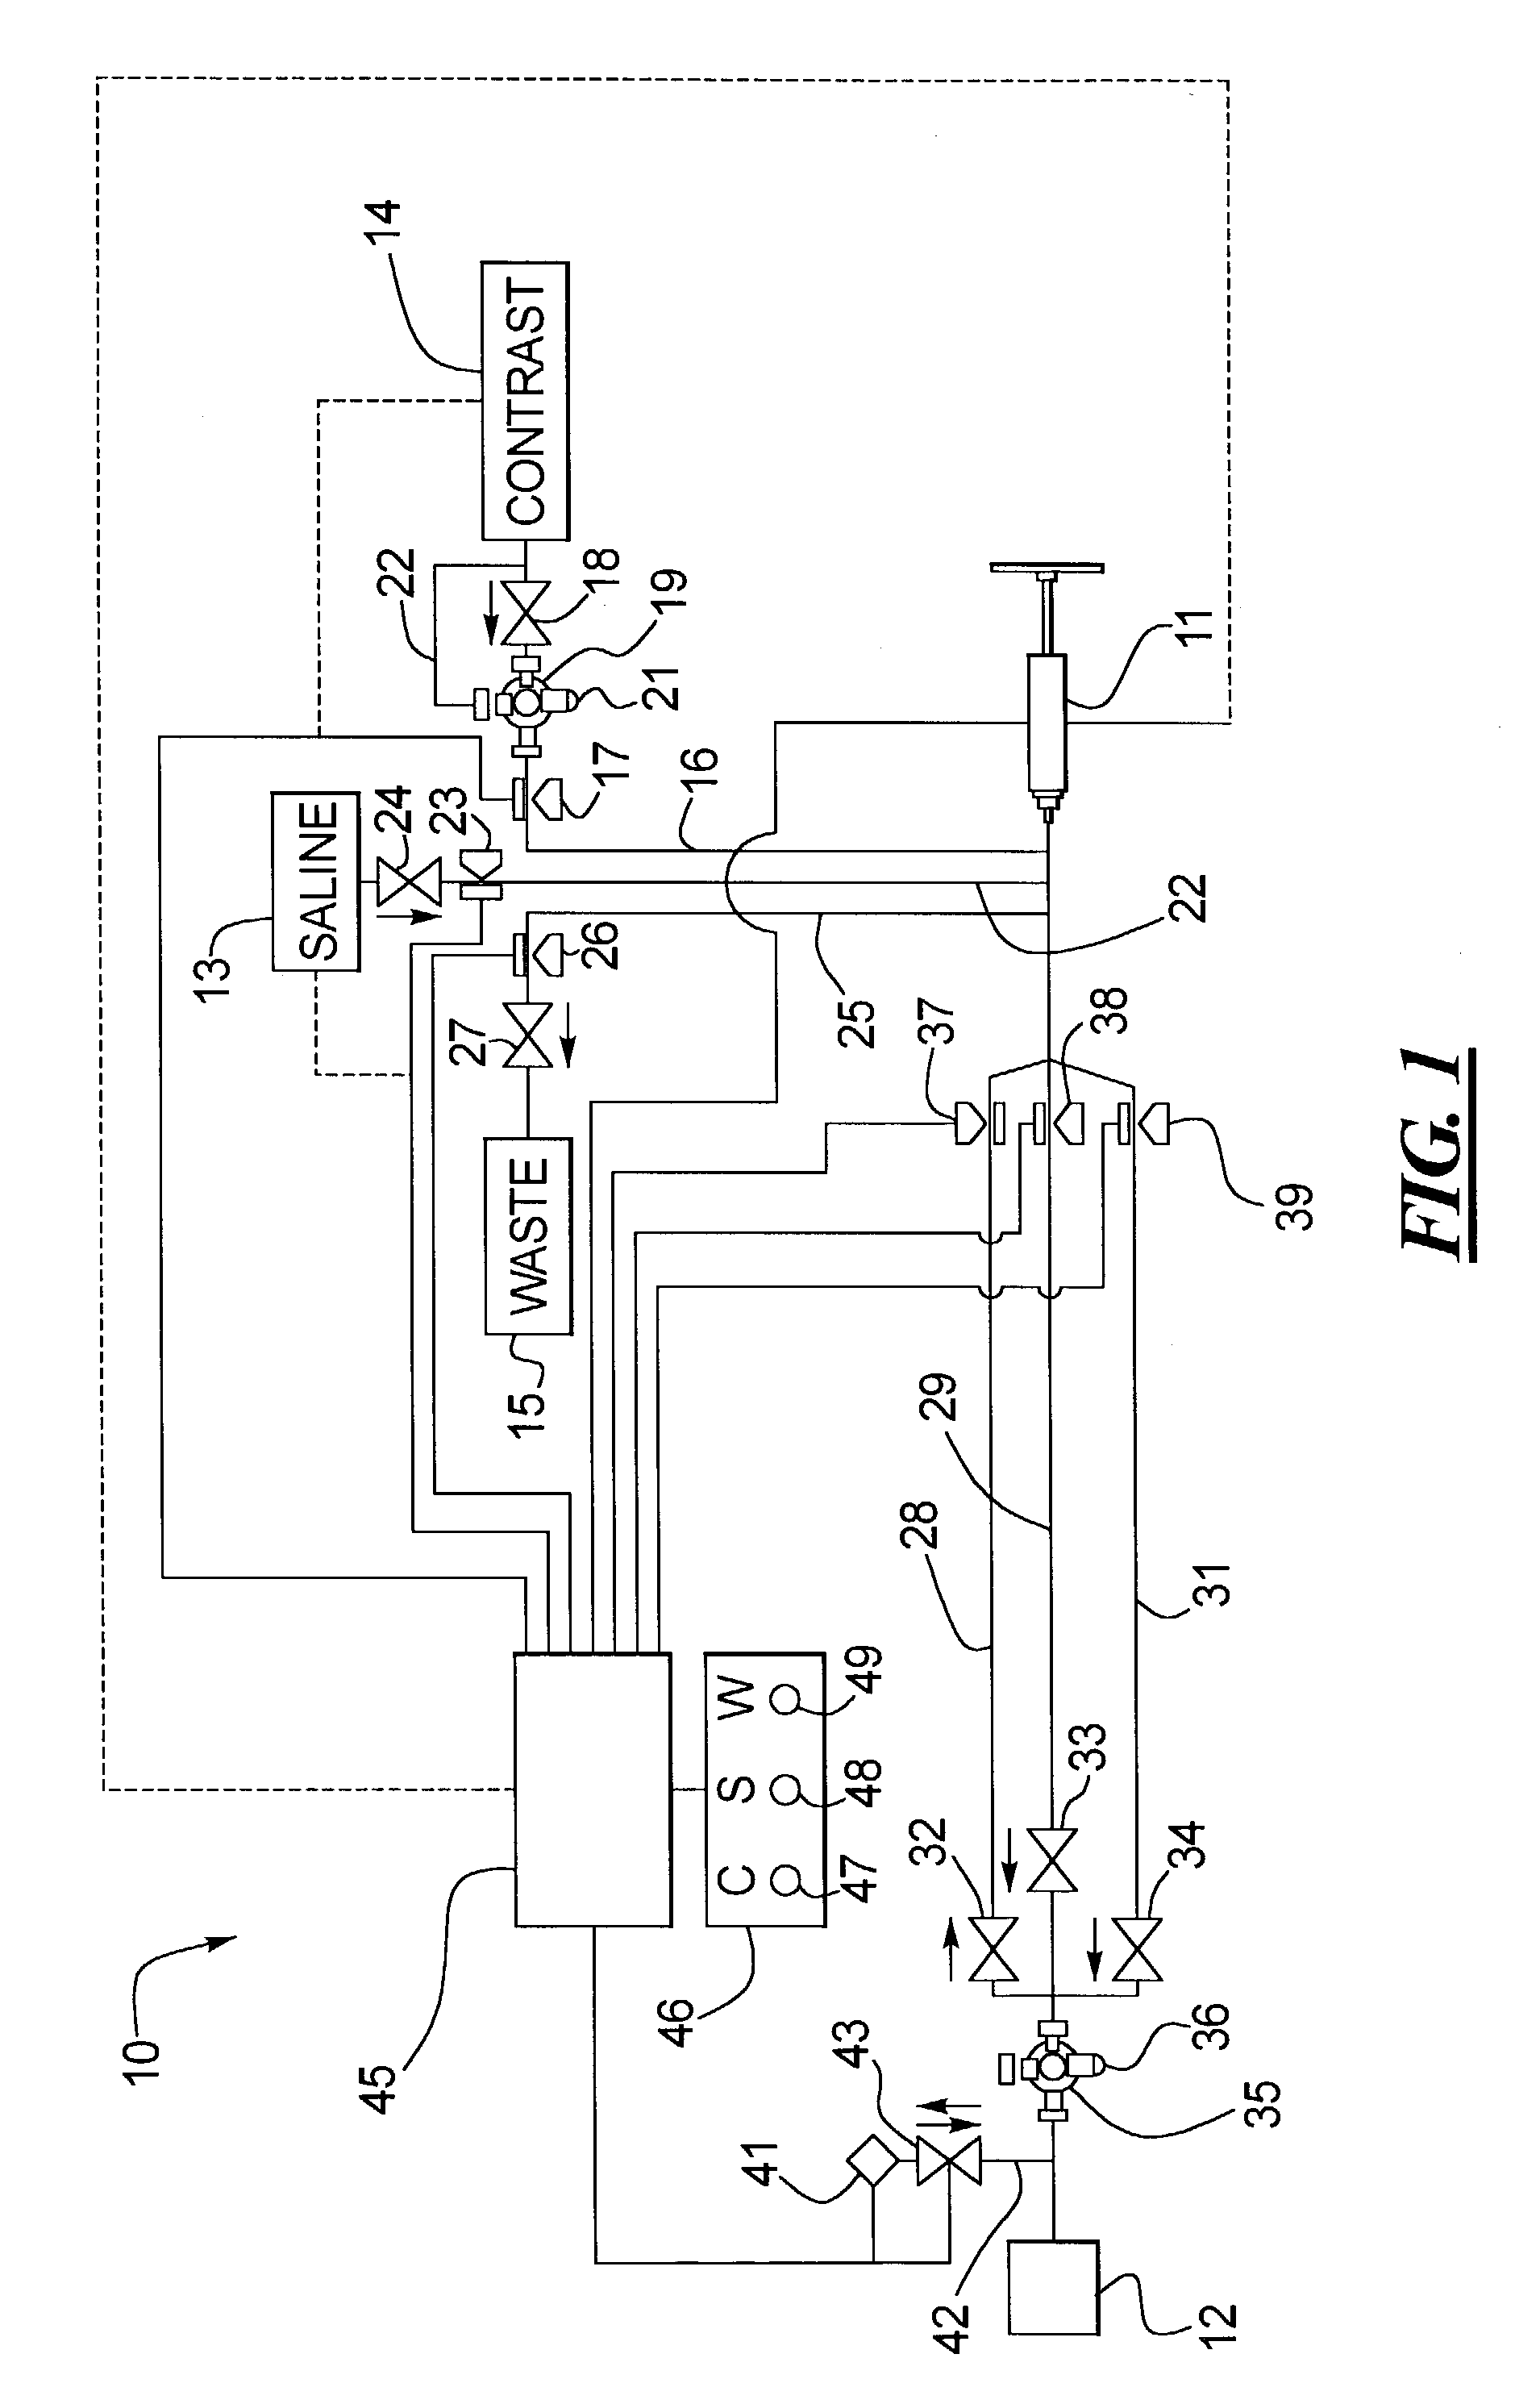 Angiographic fluid control system